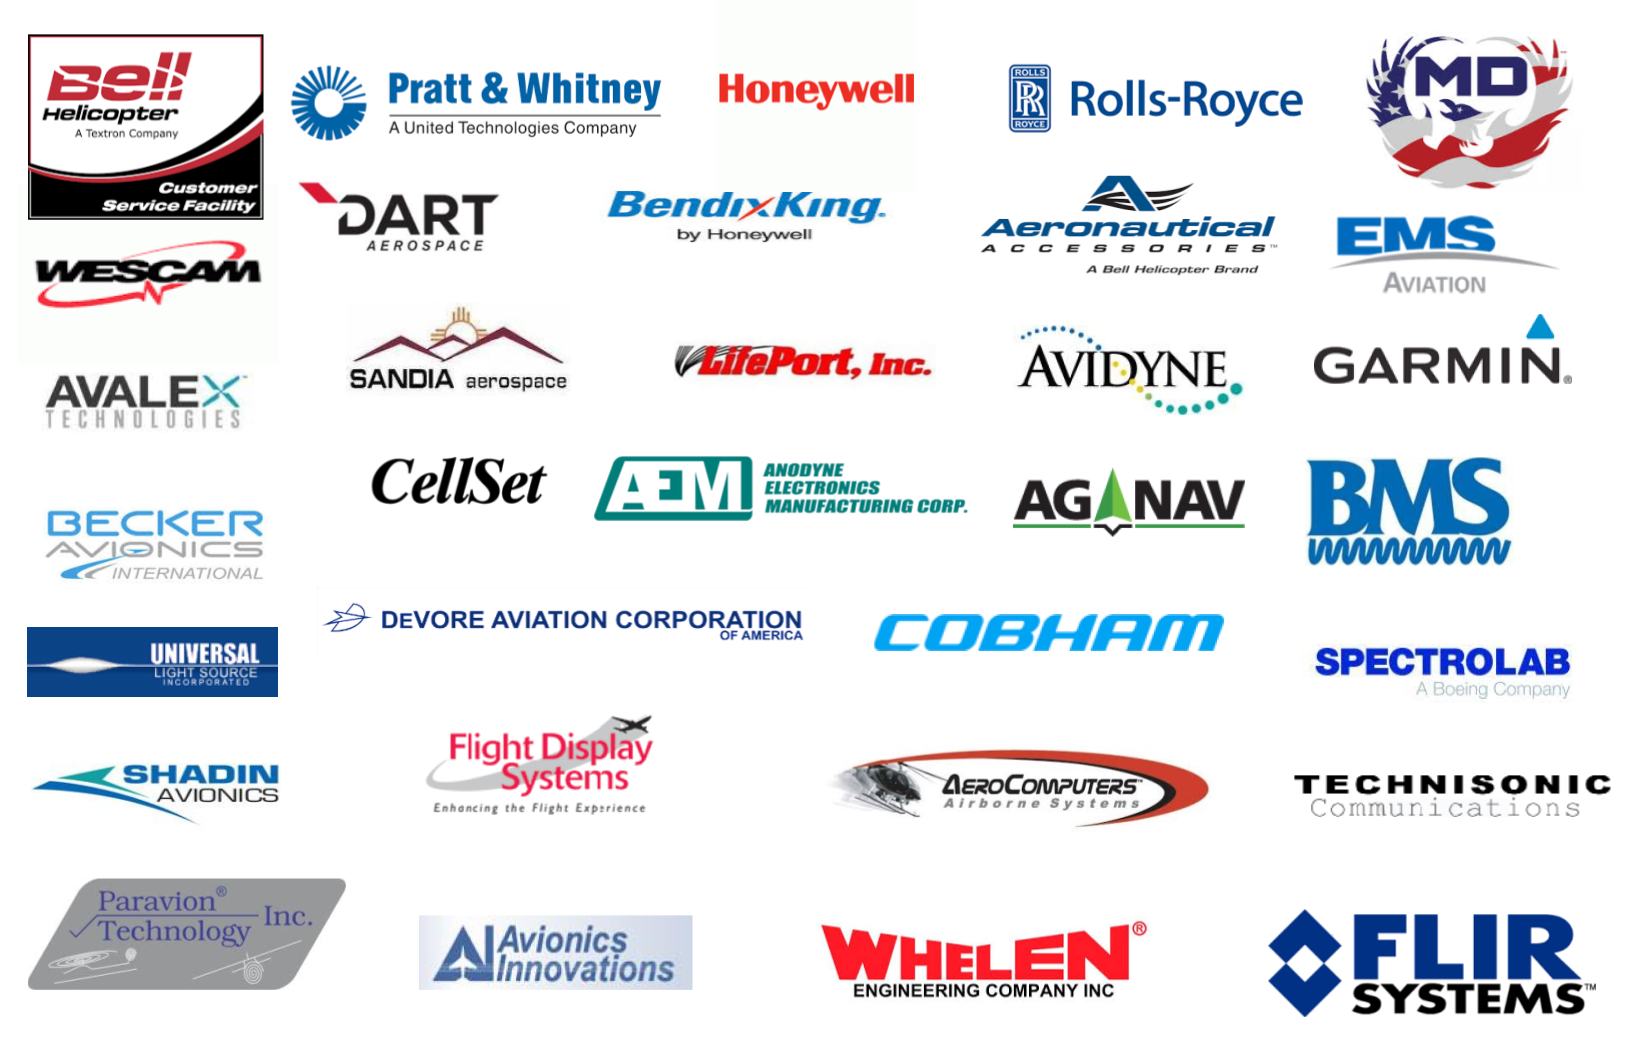 Summit Helicopters Affiliates